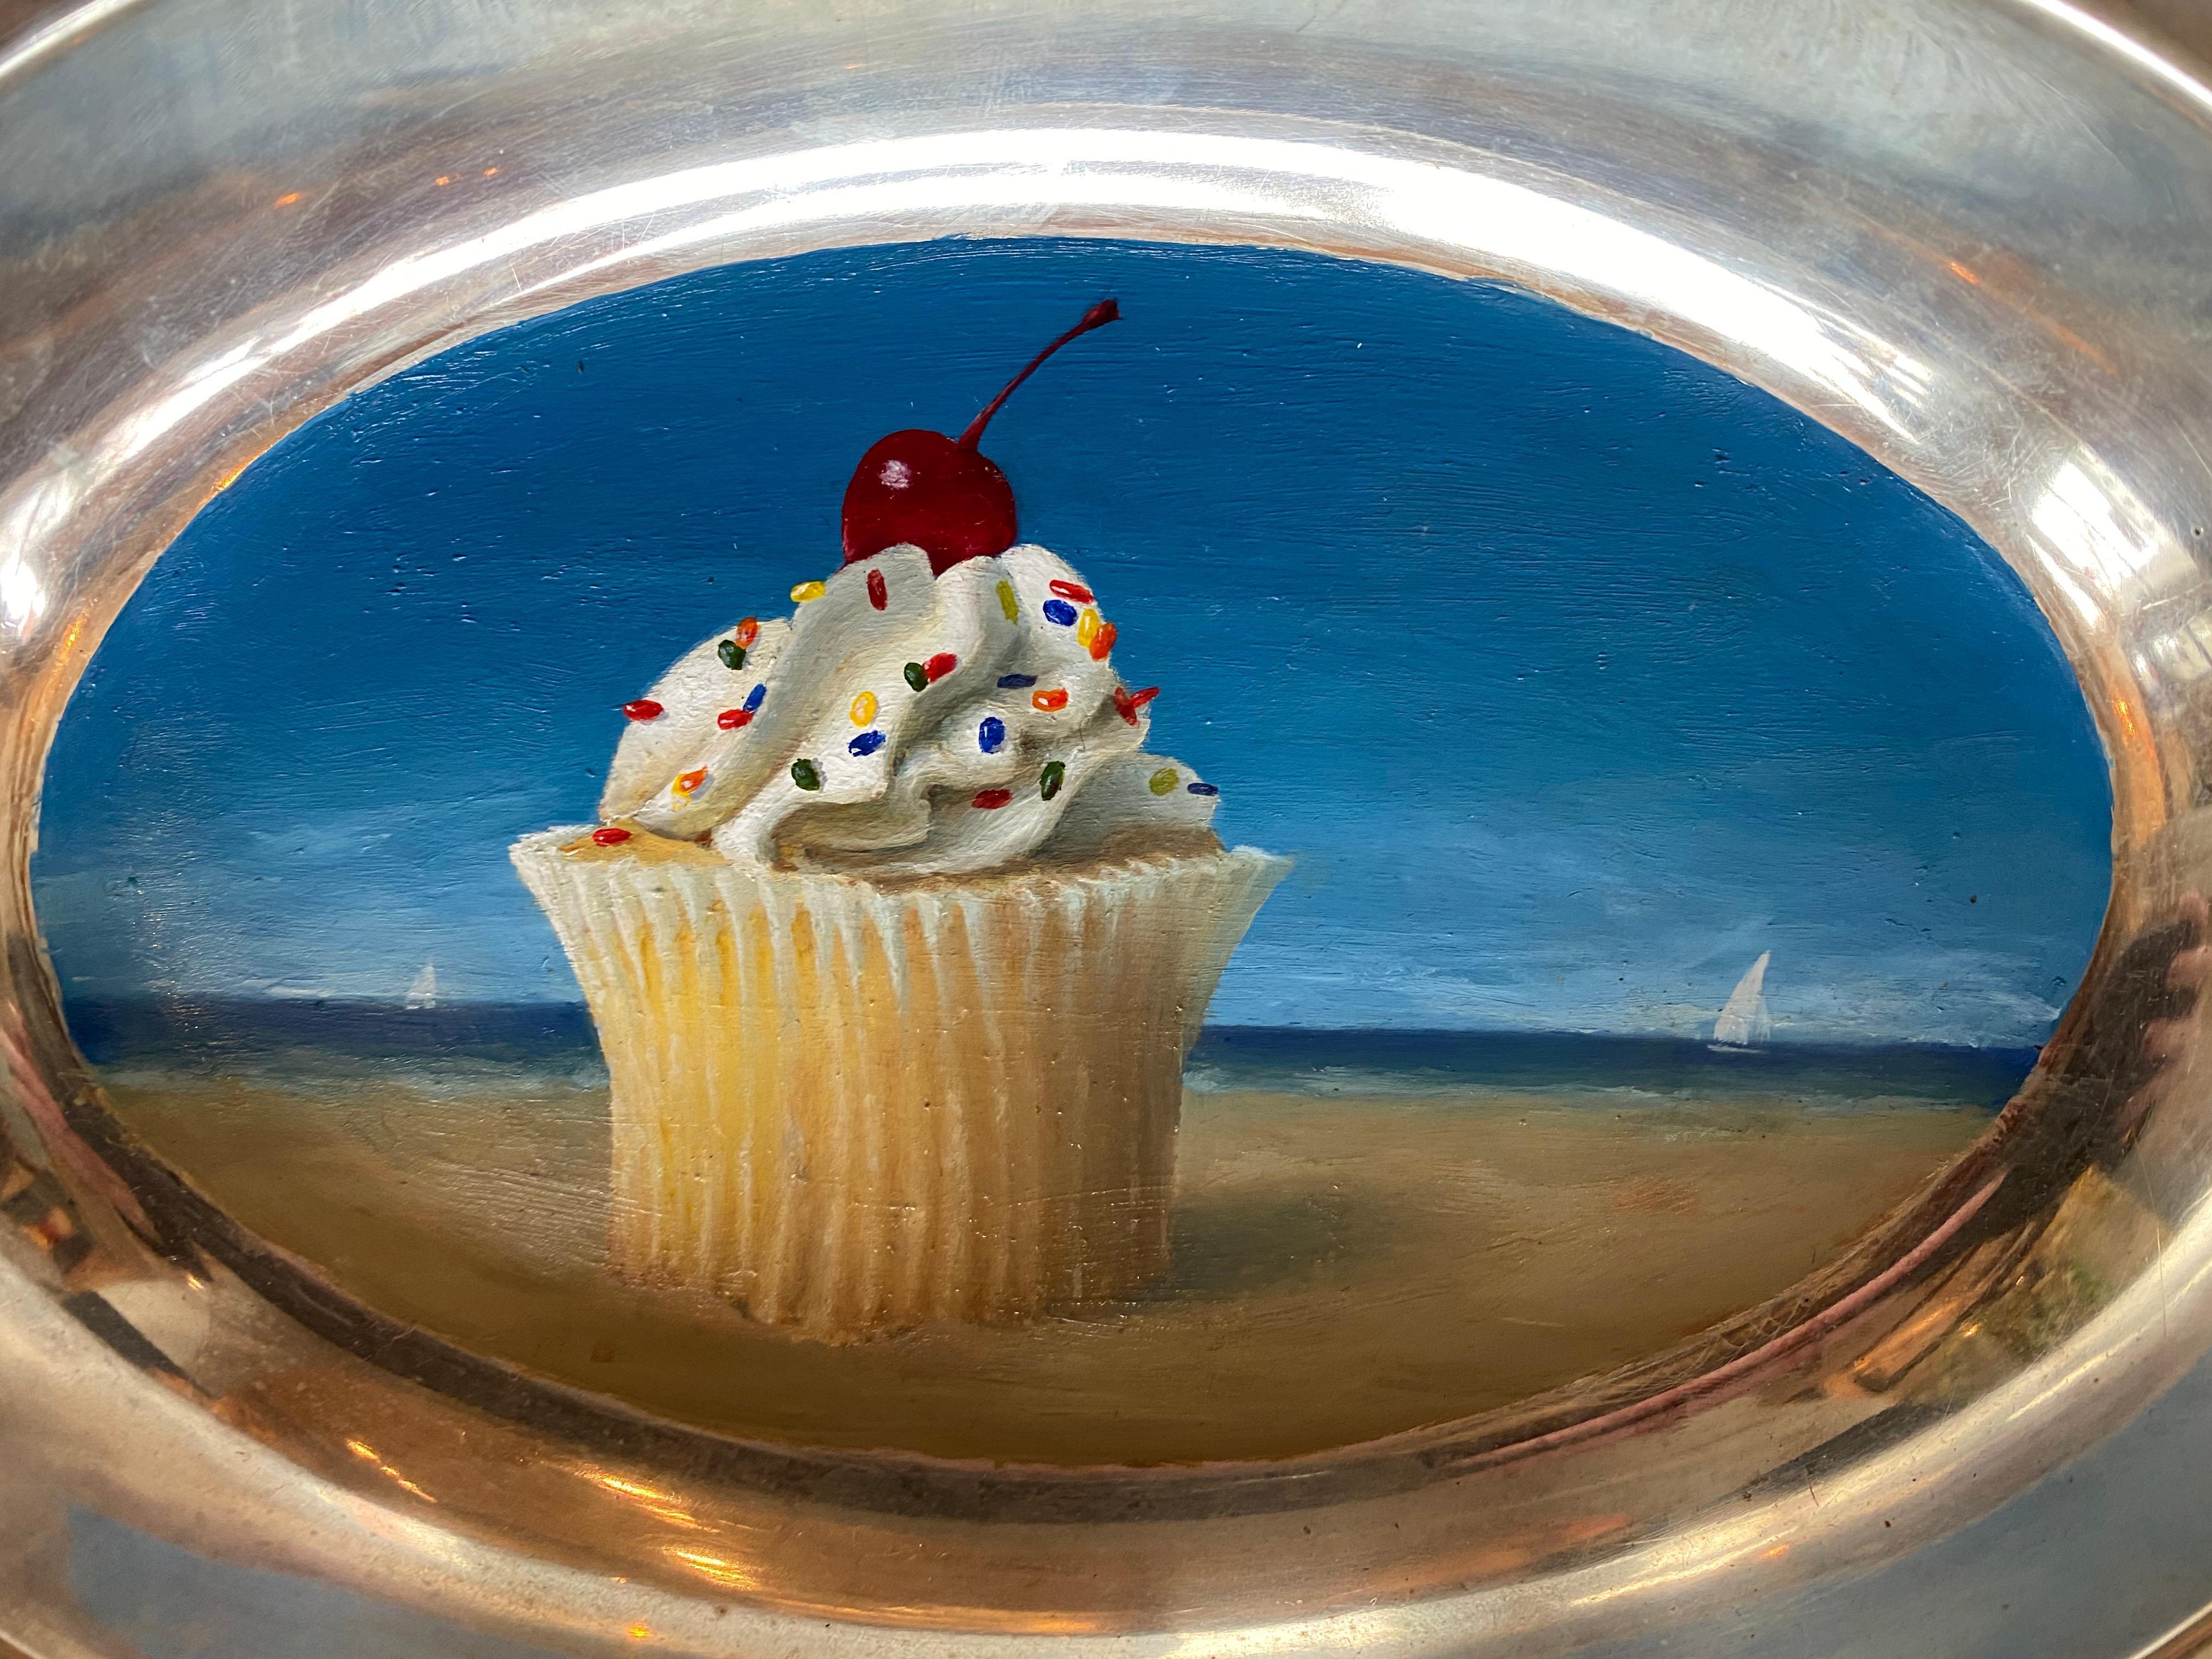 Cupcake By the Sea - unique oil painting on silver tray - Painting by Anthony Ackrill